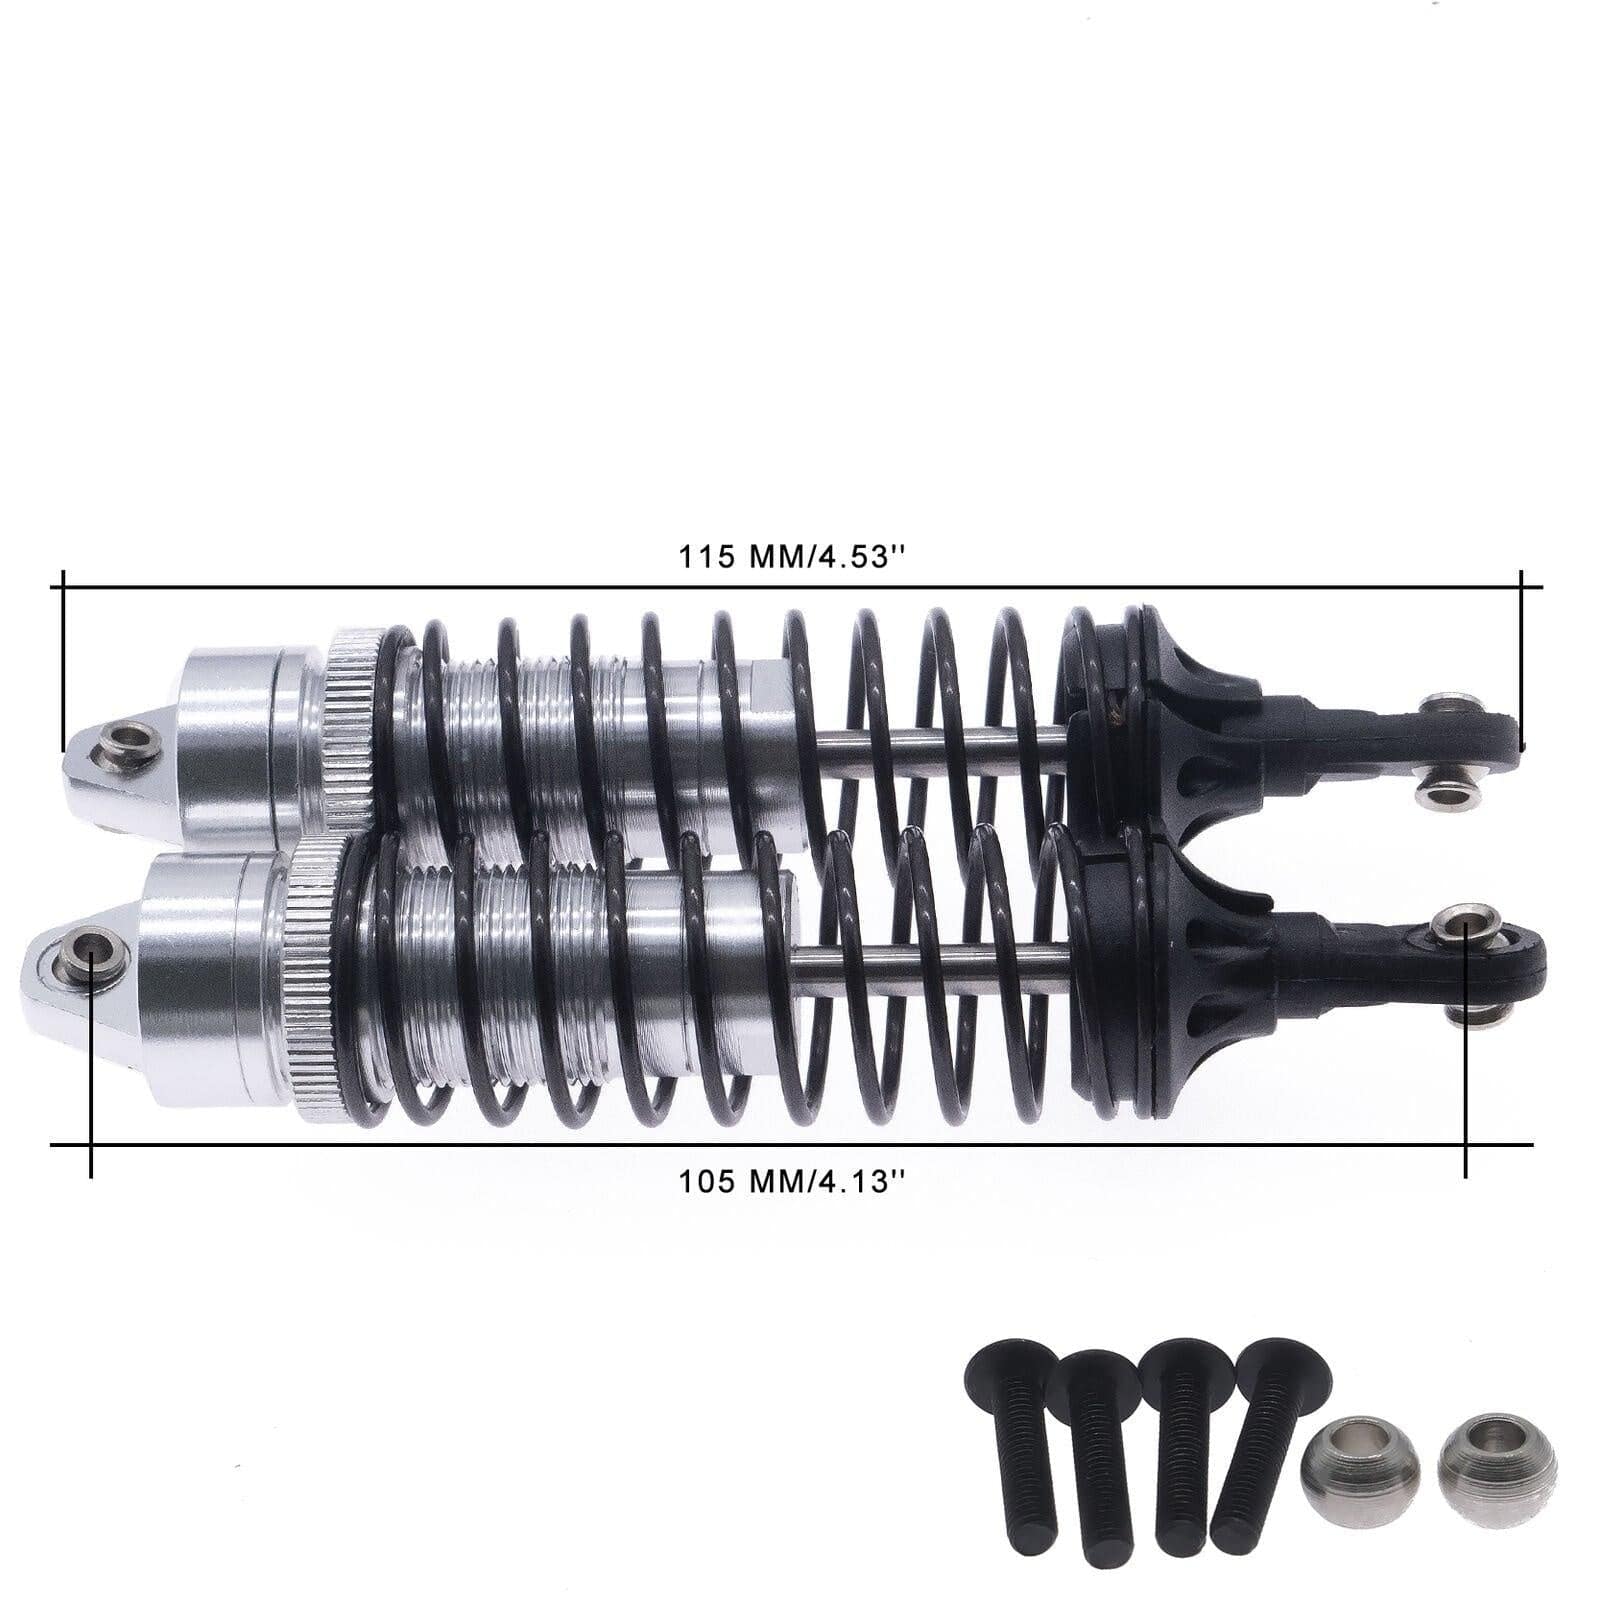 RCAWD ECX UPGRADE PARTS Rear Shock RCAWD RC Shocks Set Front Rear For ECX 1/10 2WD Circuit Ruckus AMP